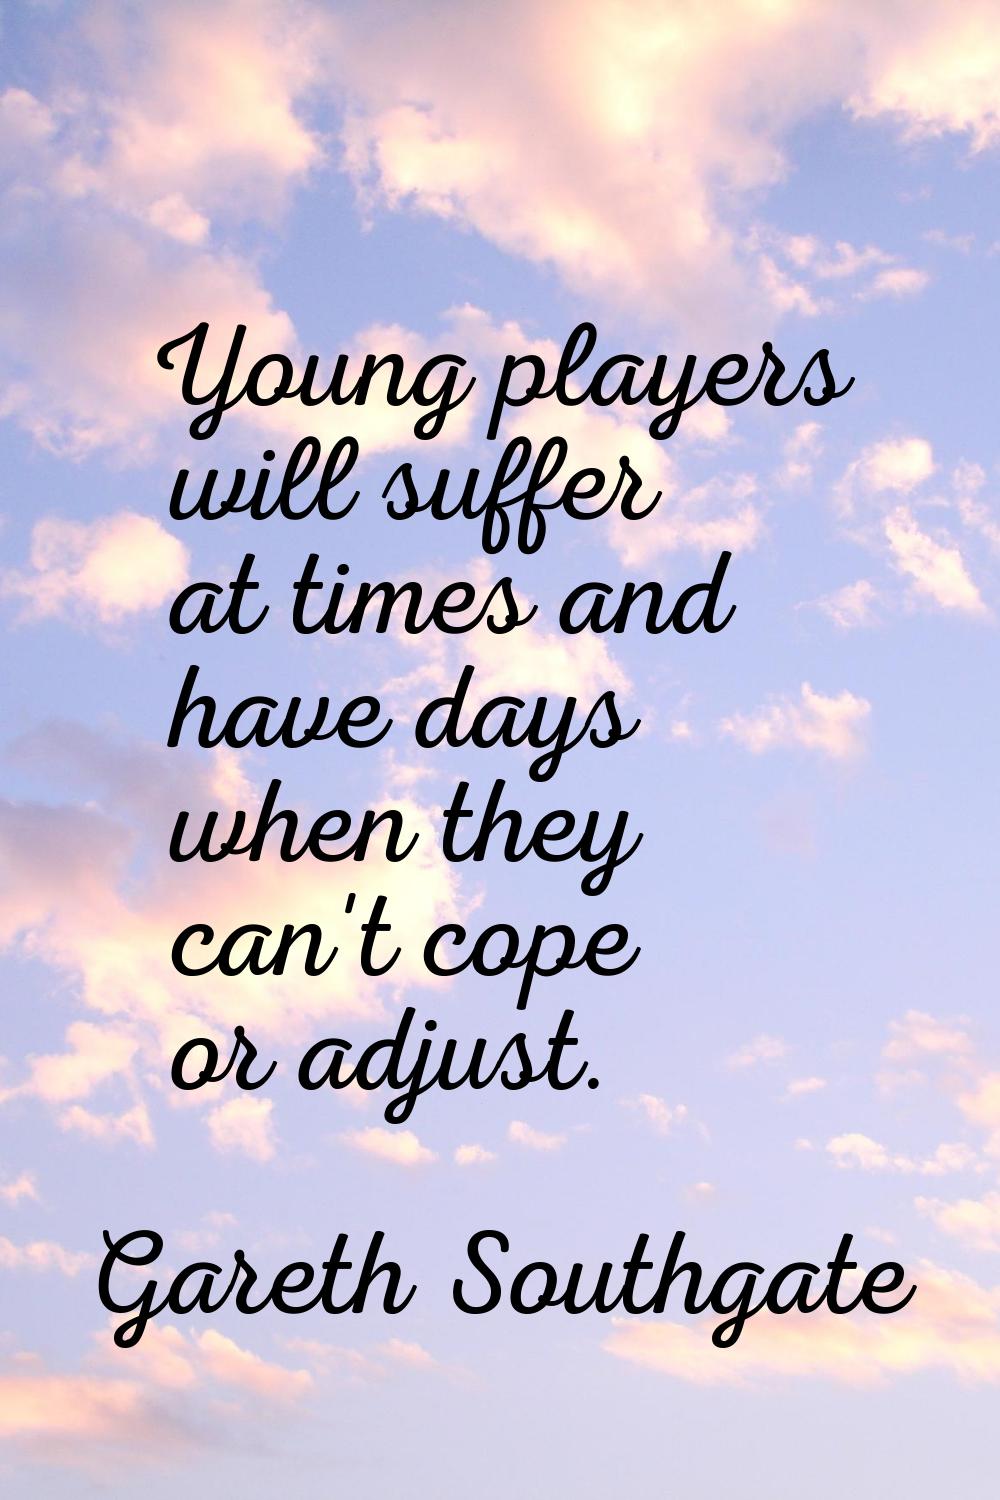 Young players will suffer at times and have days when they can't cope or adjust.